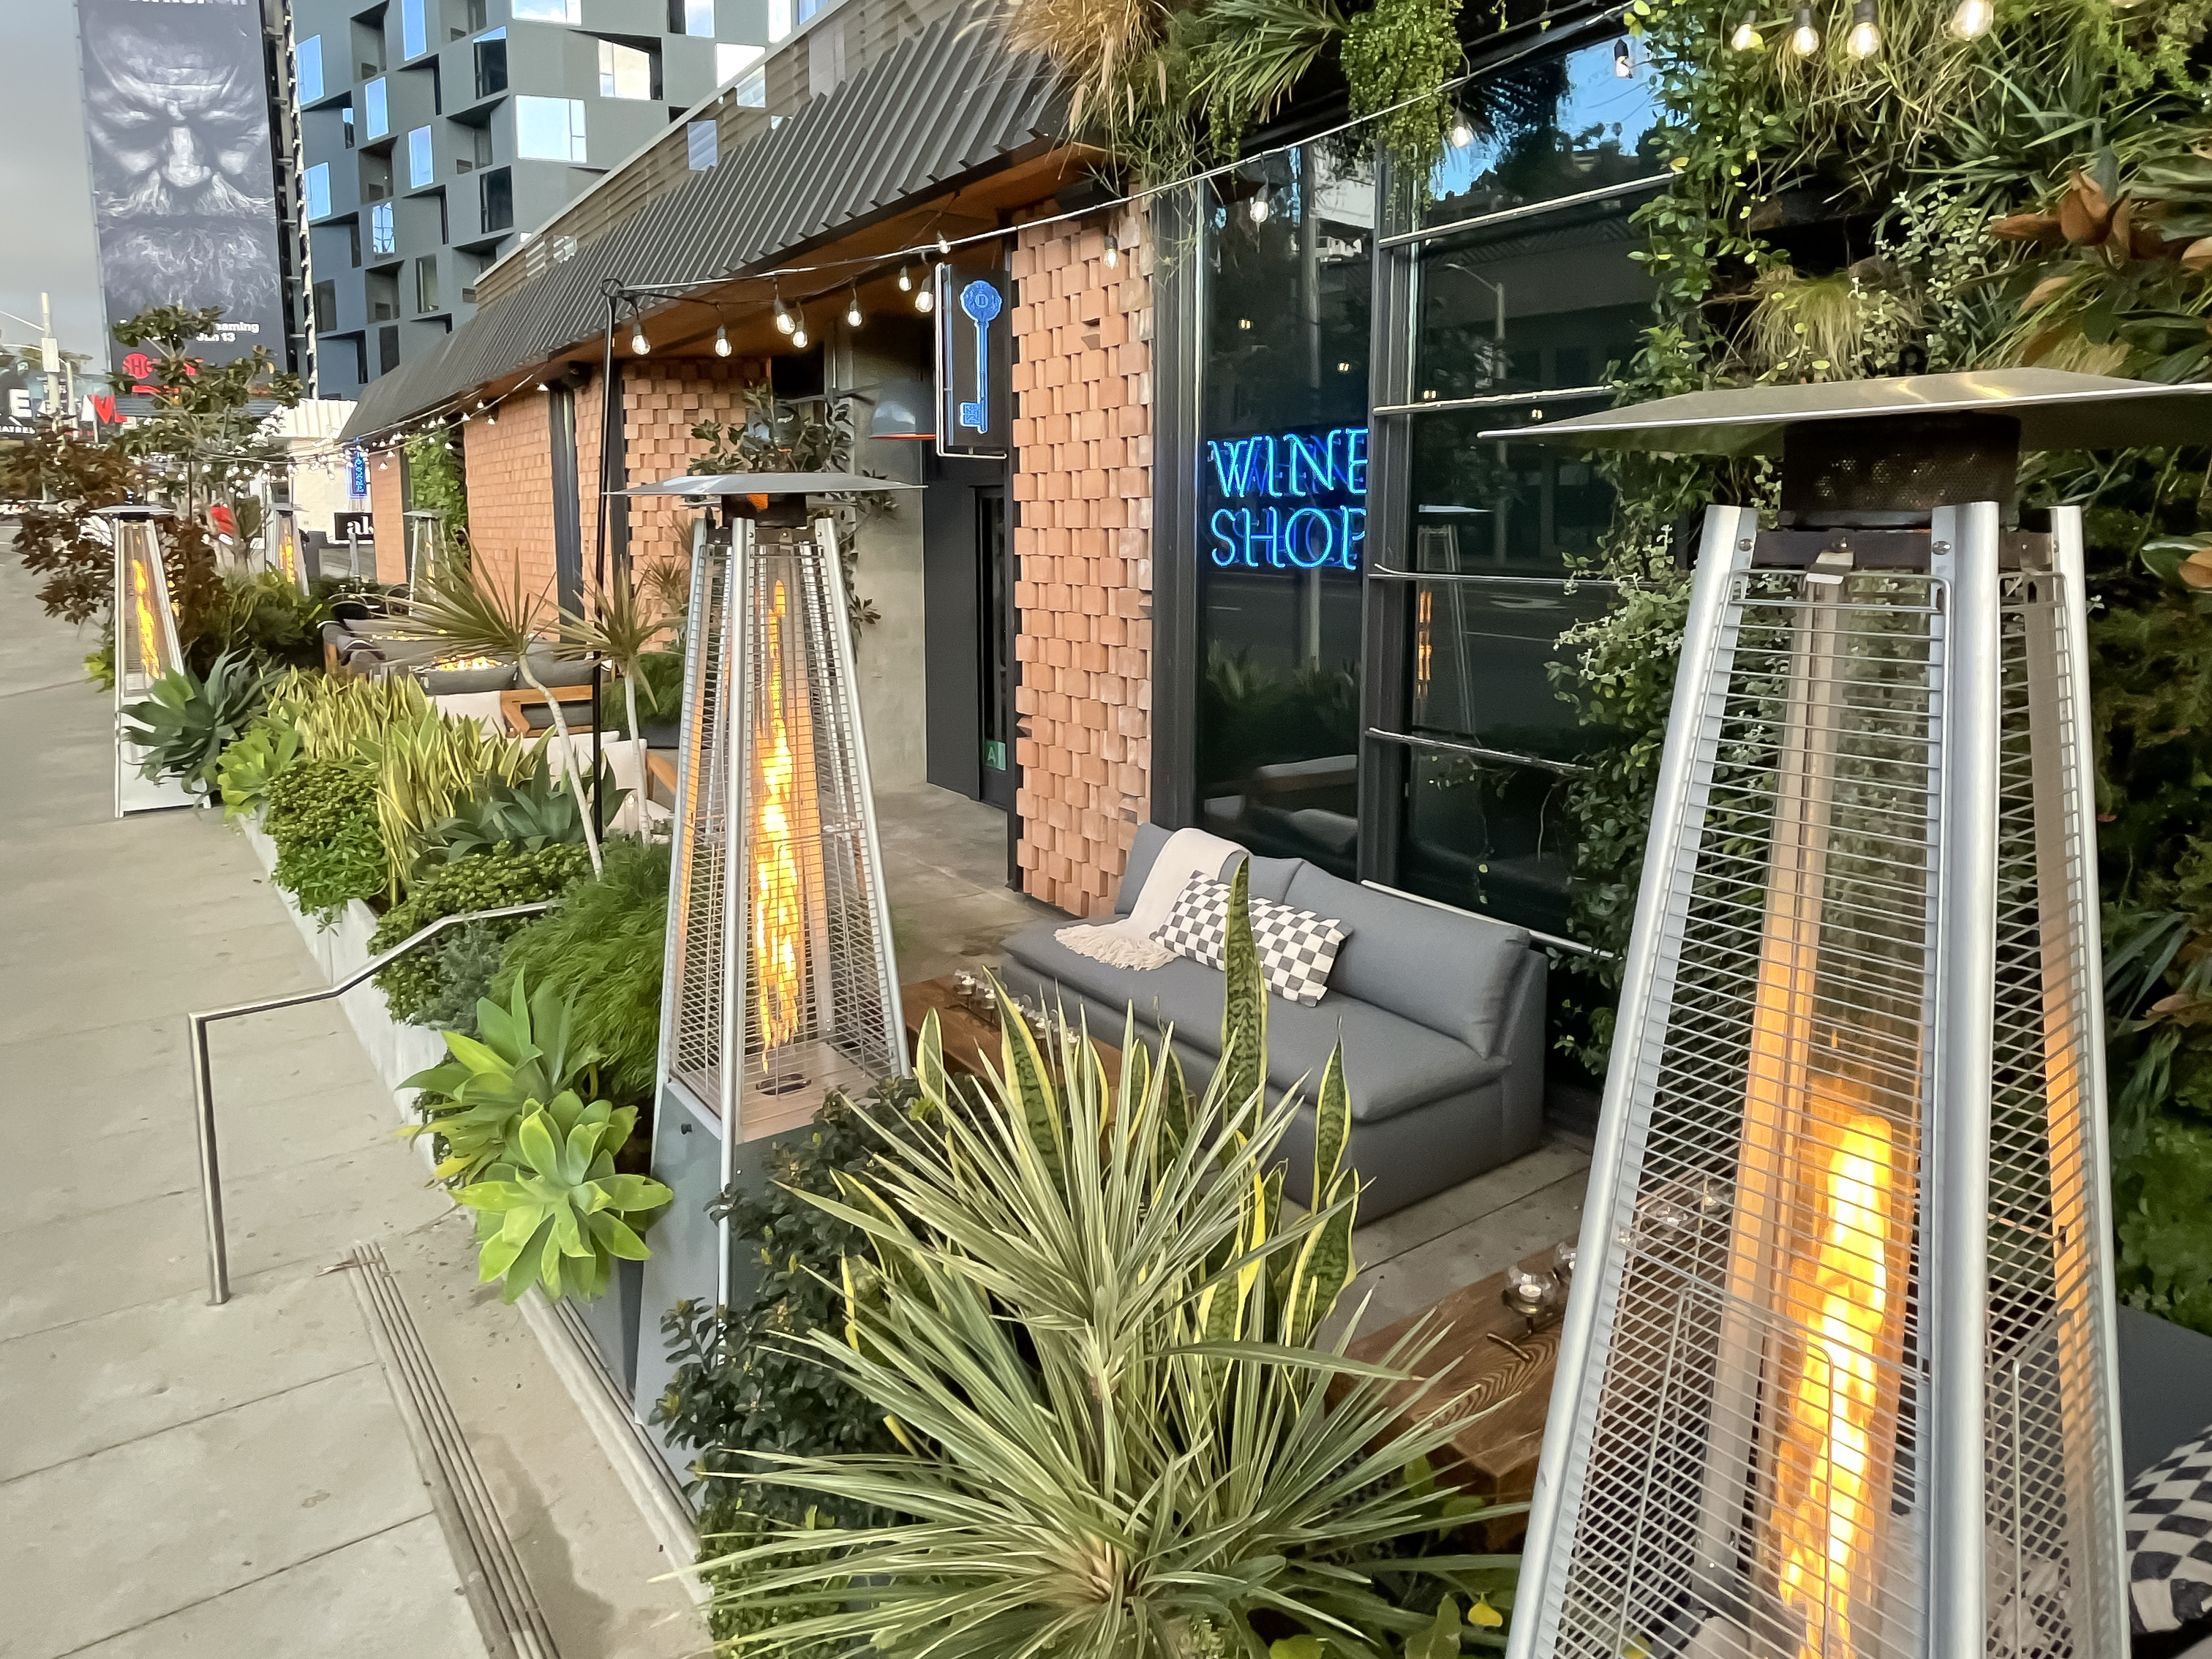 An outdoor seating area with heat lamps, sofas, and chairs at Boutellier wine bar in West Hollywood, California.